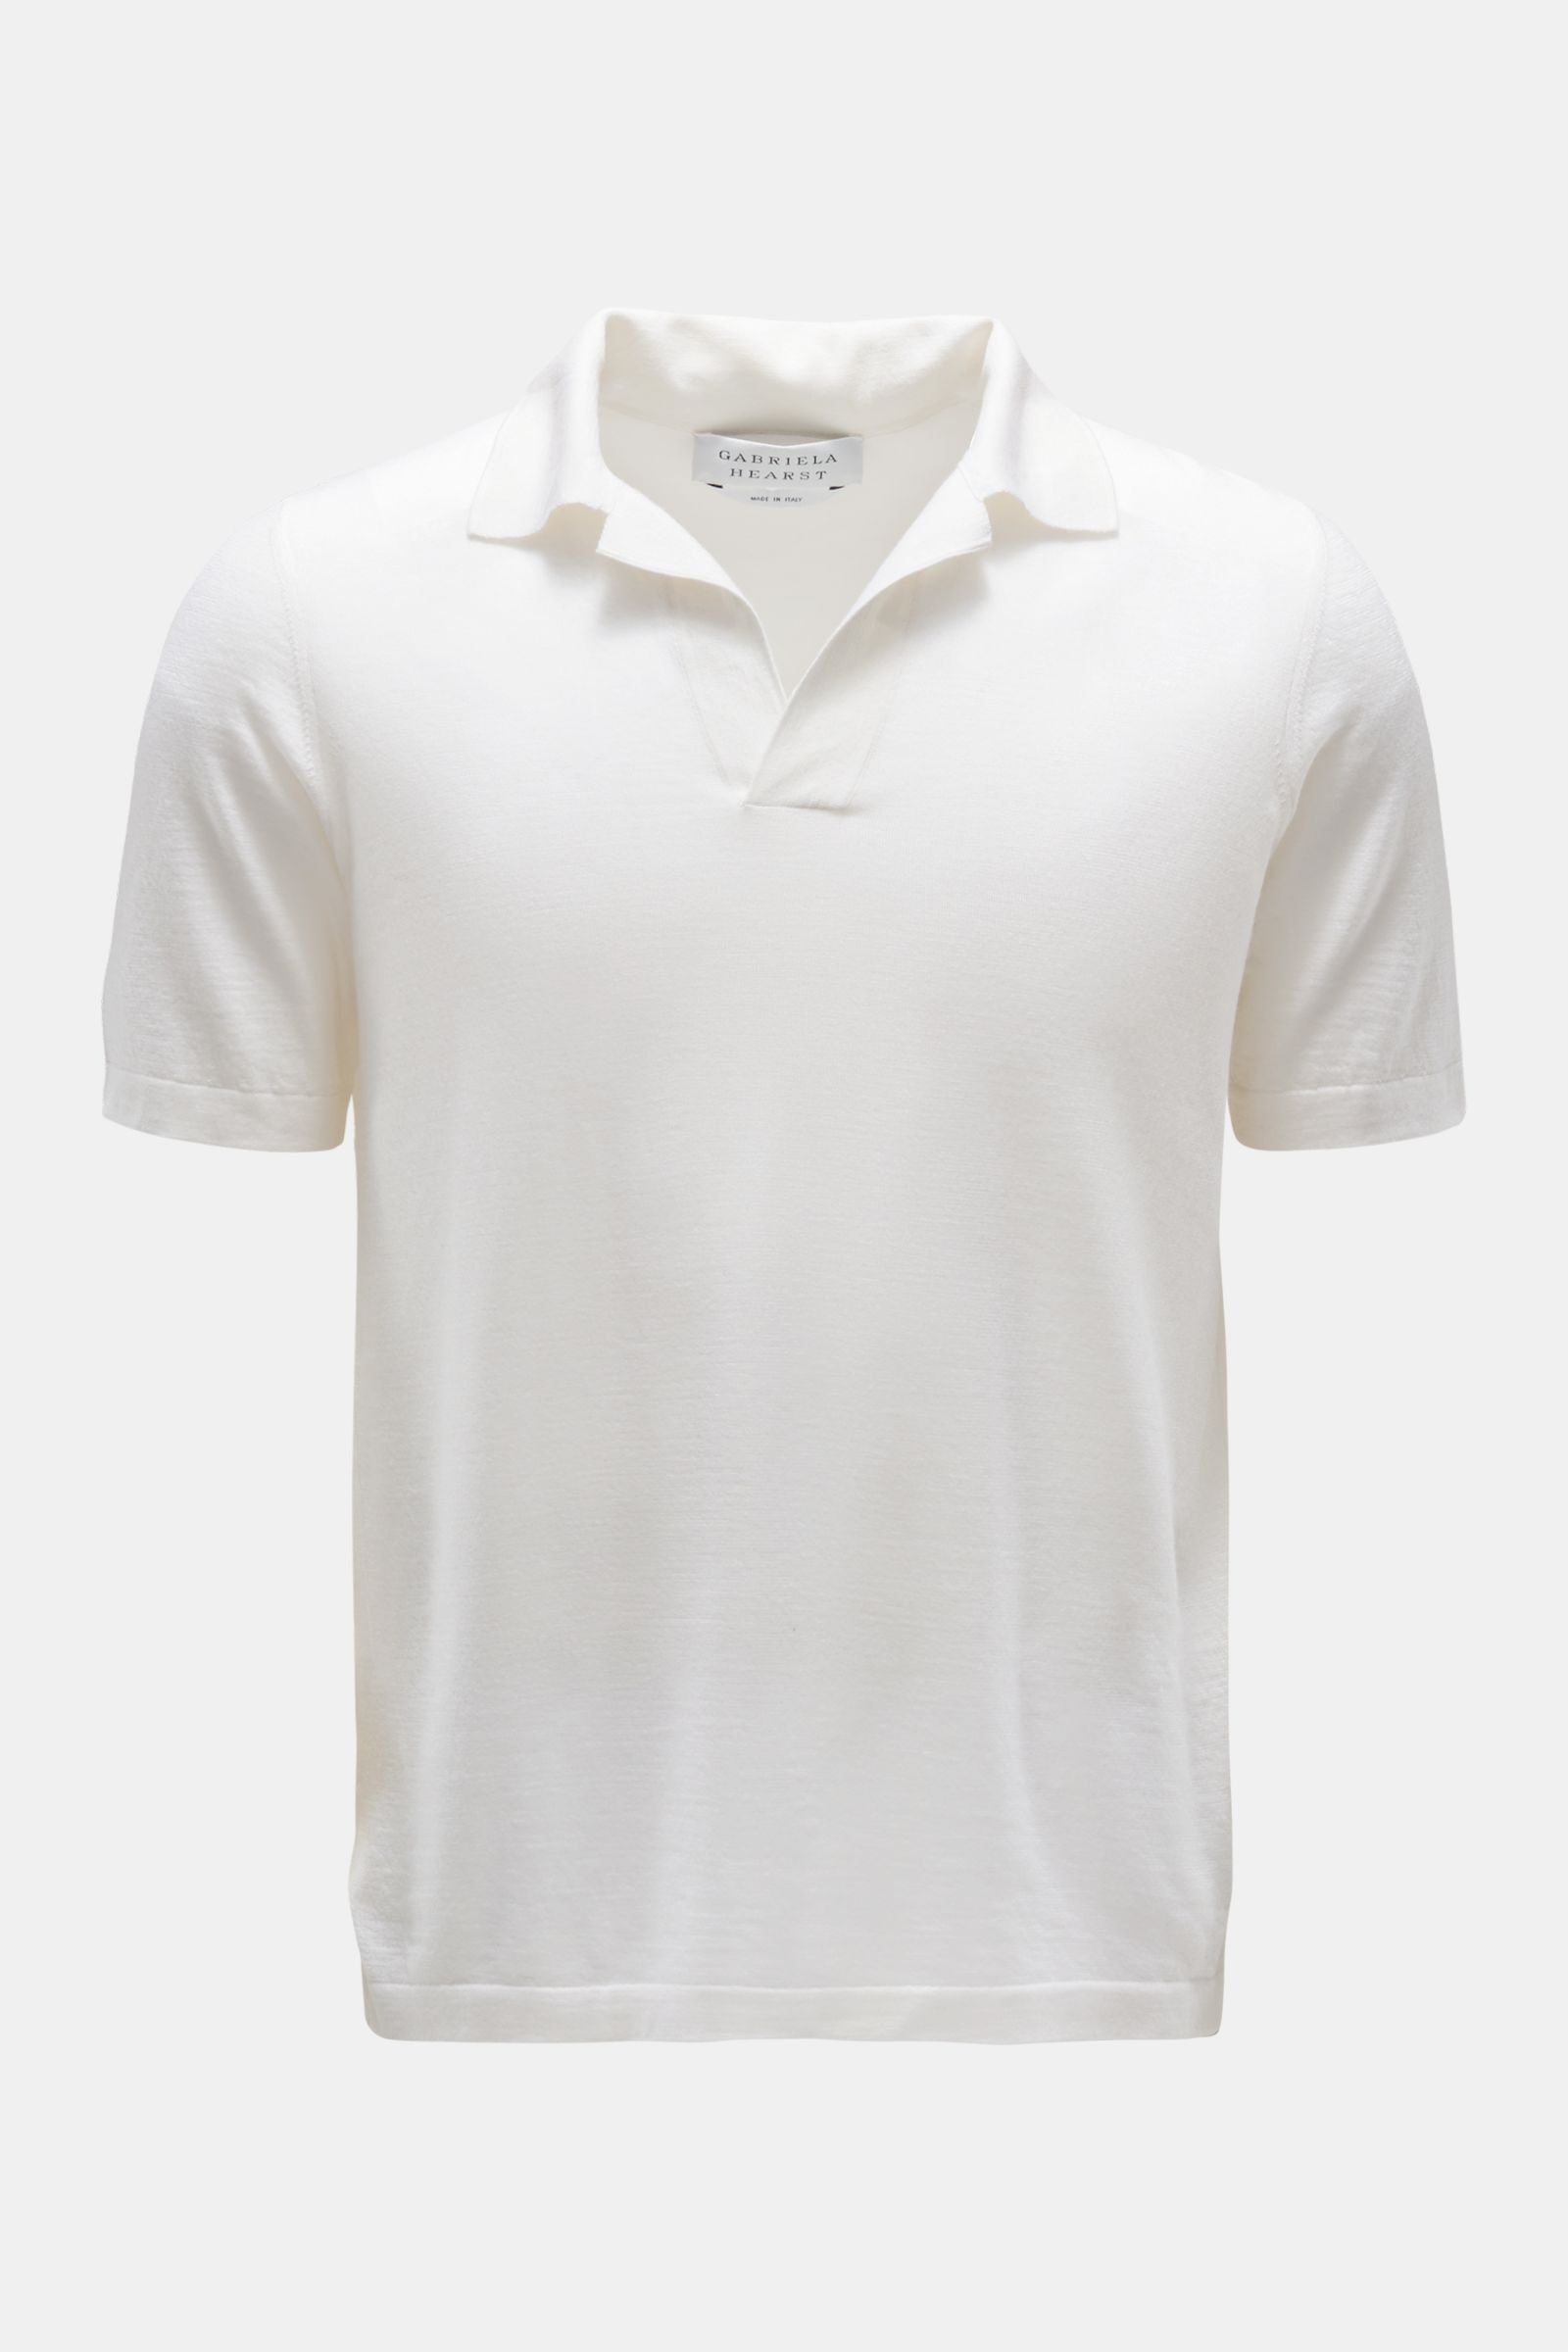 Cashmere short sleeve fine knit polo 'Stendhal' cream